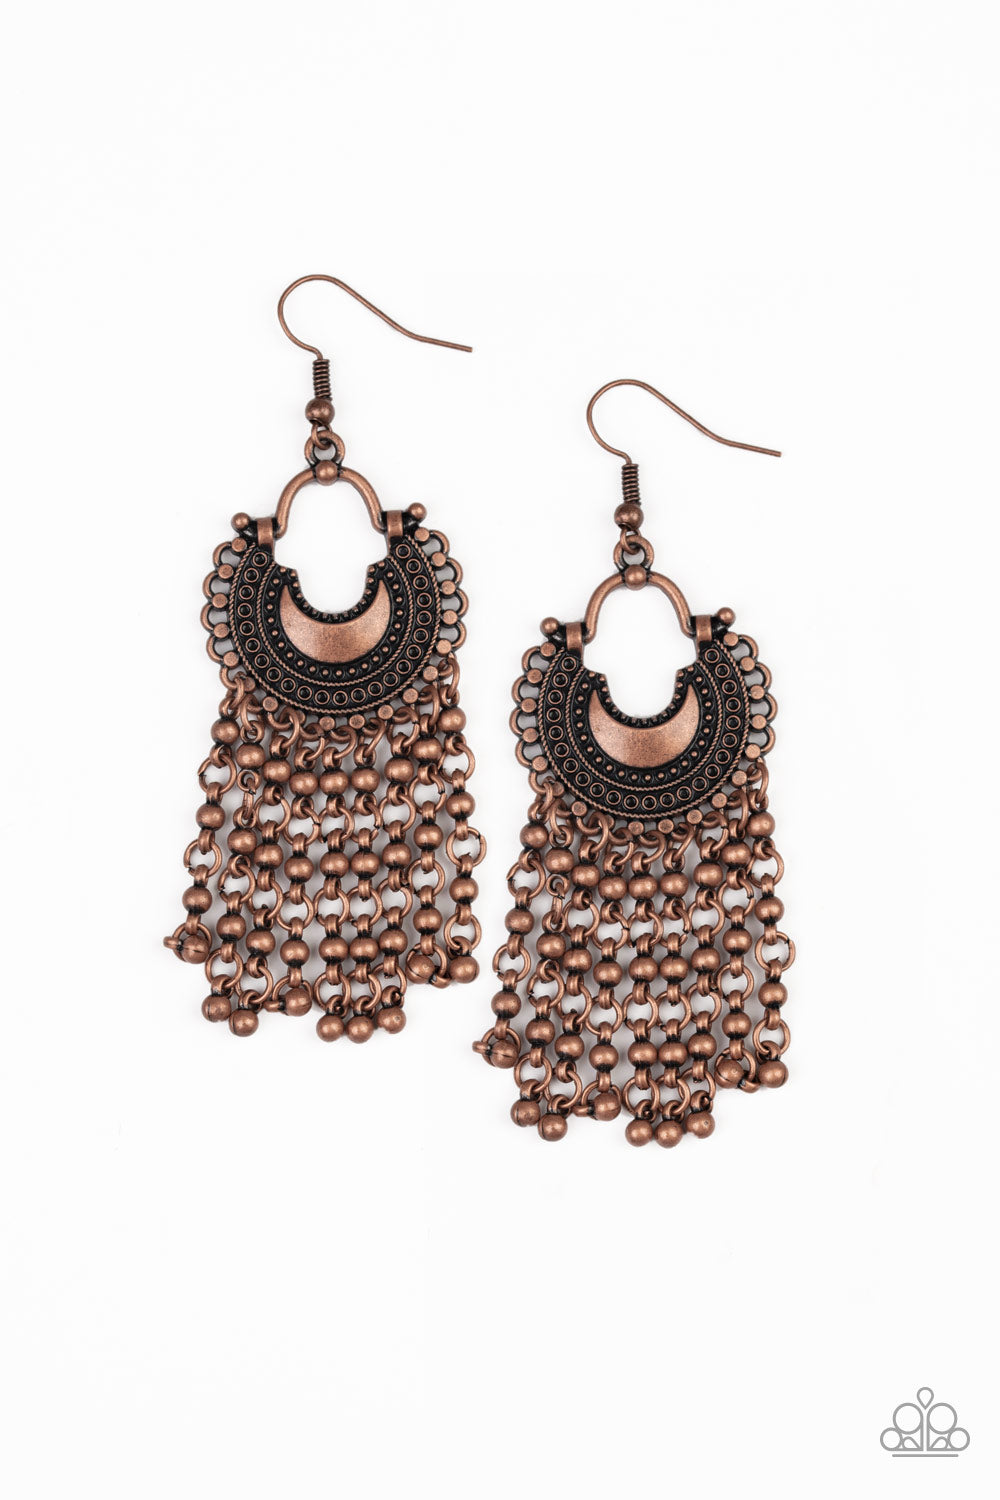 Catching Dreams - Copper Paparazzi Jewelry